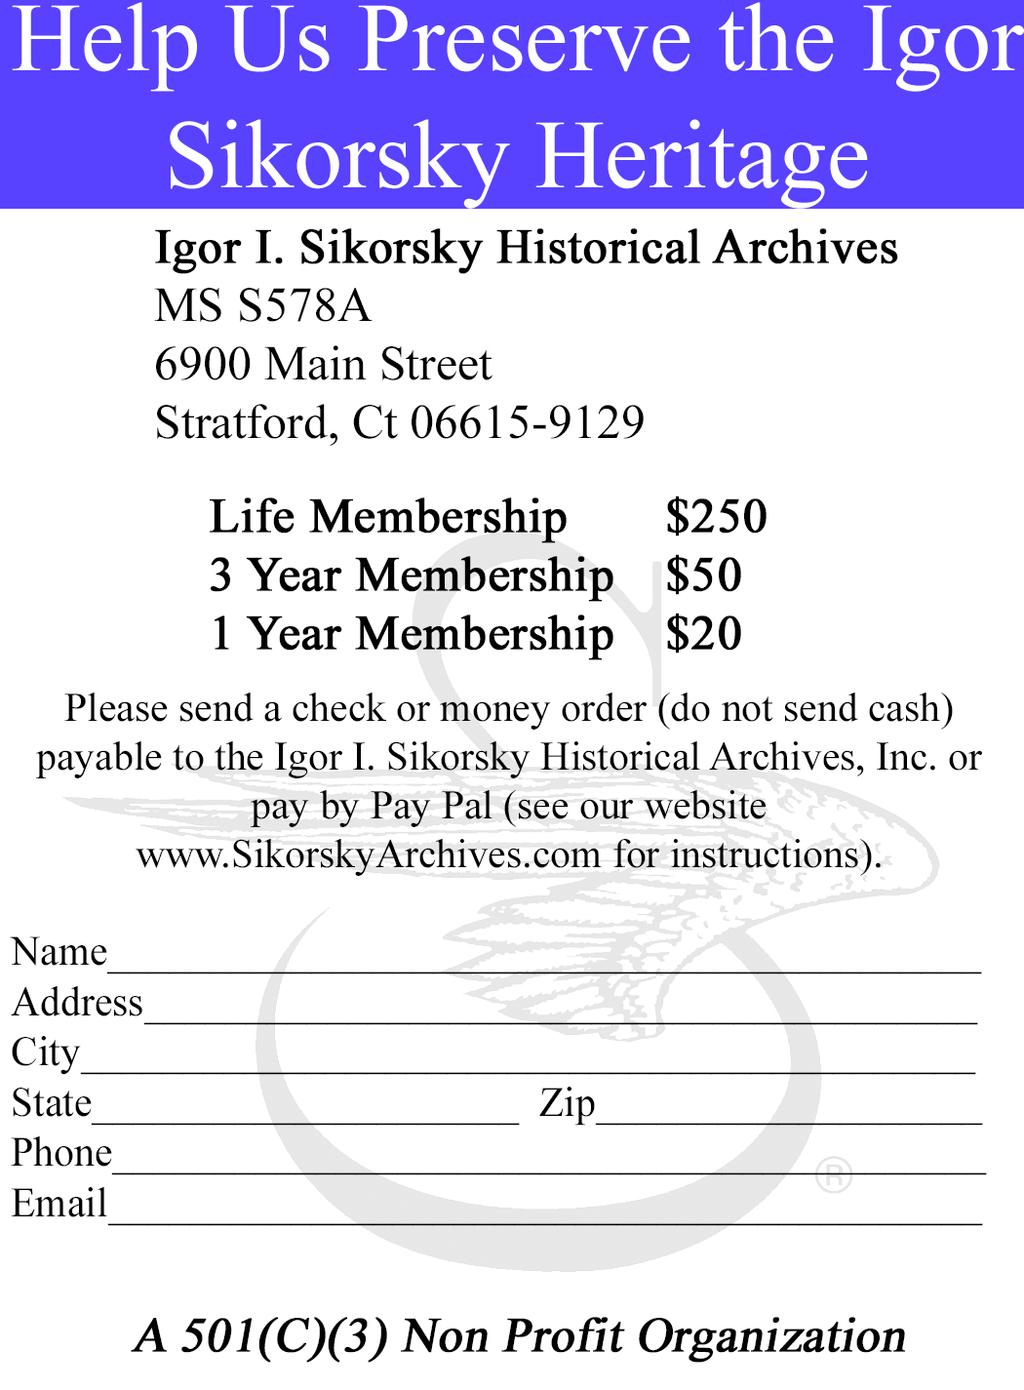 Please send a check or money order (do not send cash) payable to The Igor I. Sikorsky Historical Archives, Inc.